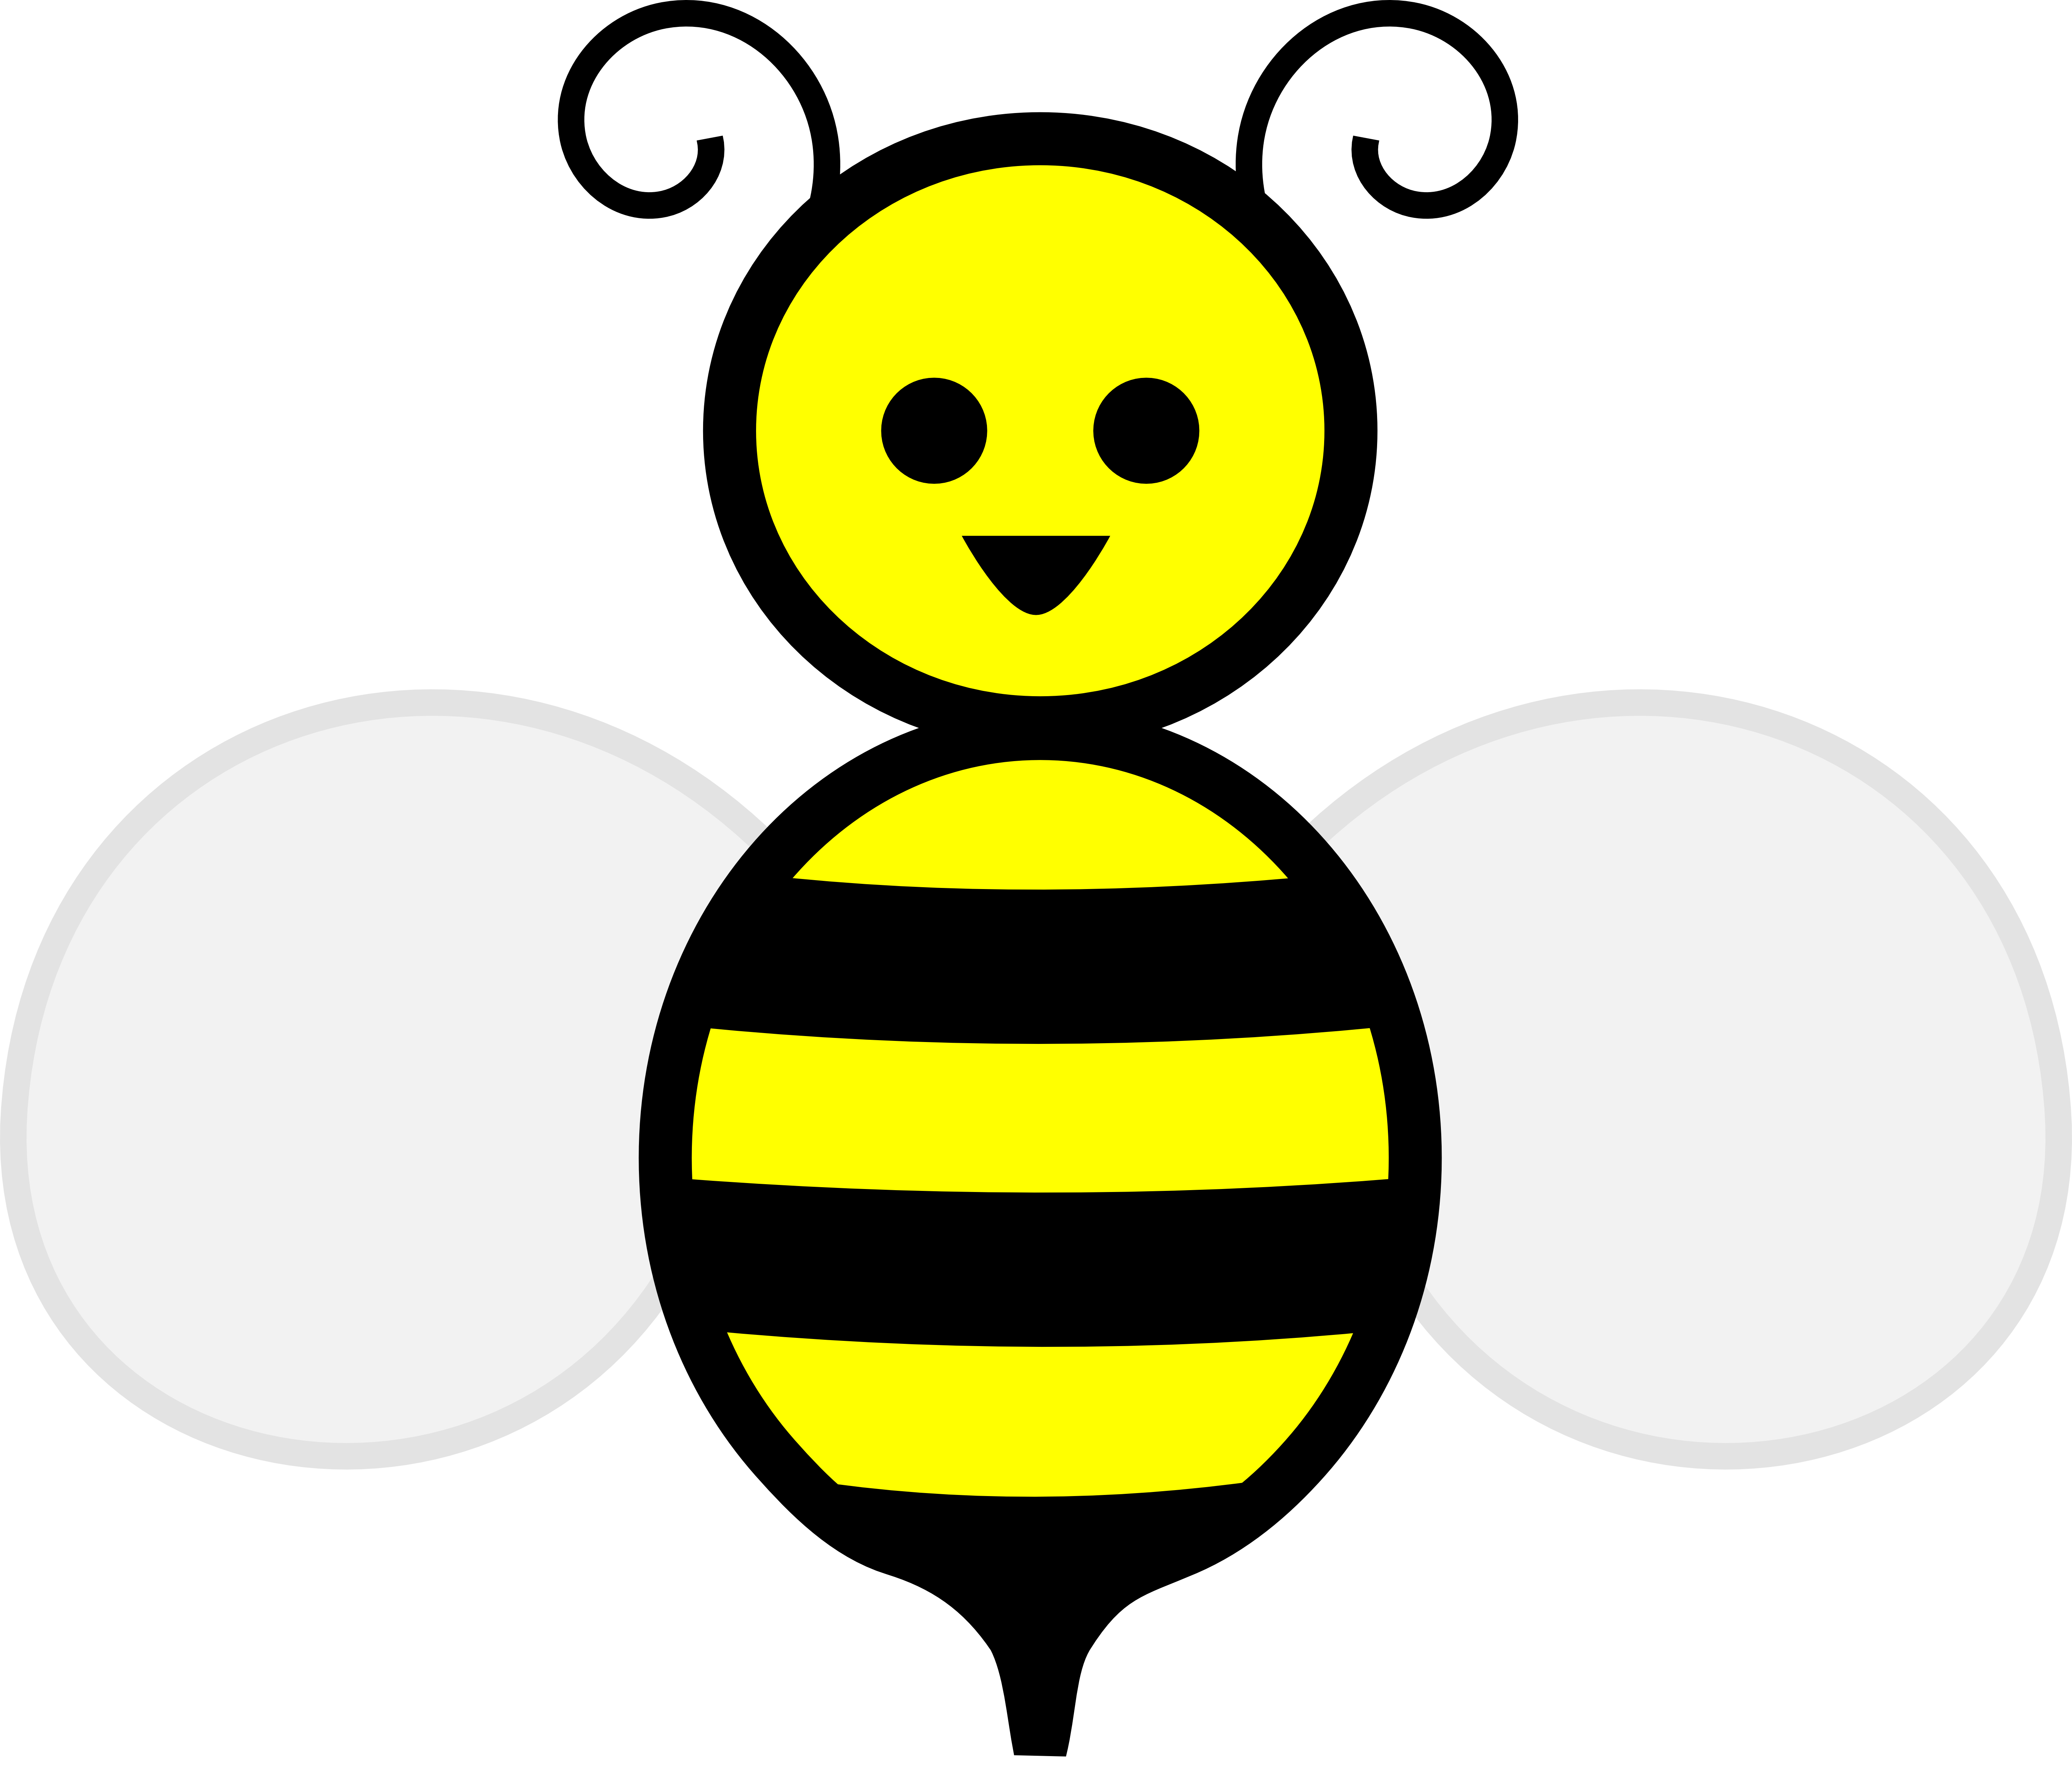 Bumblebee clipart august, Bumblebee august Transparent FREE